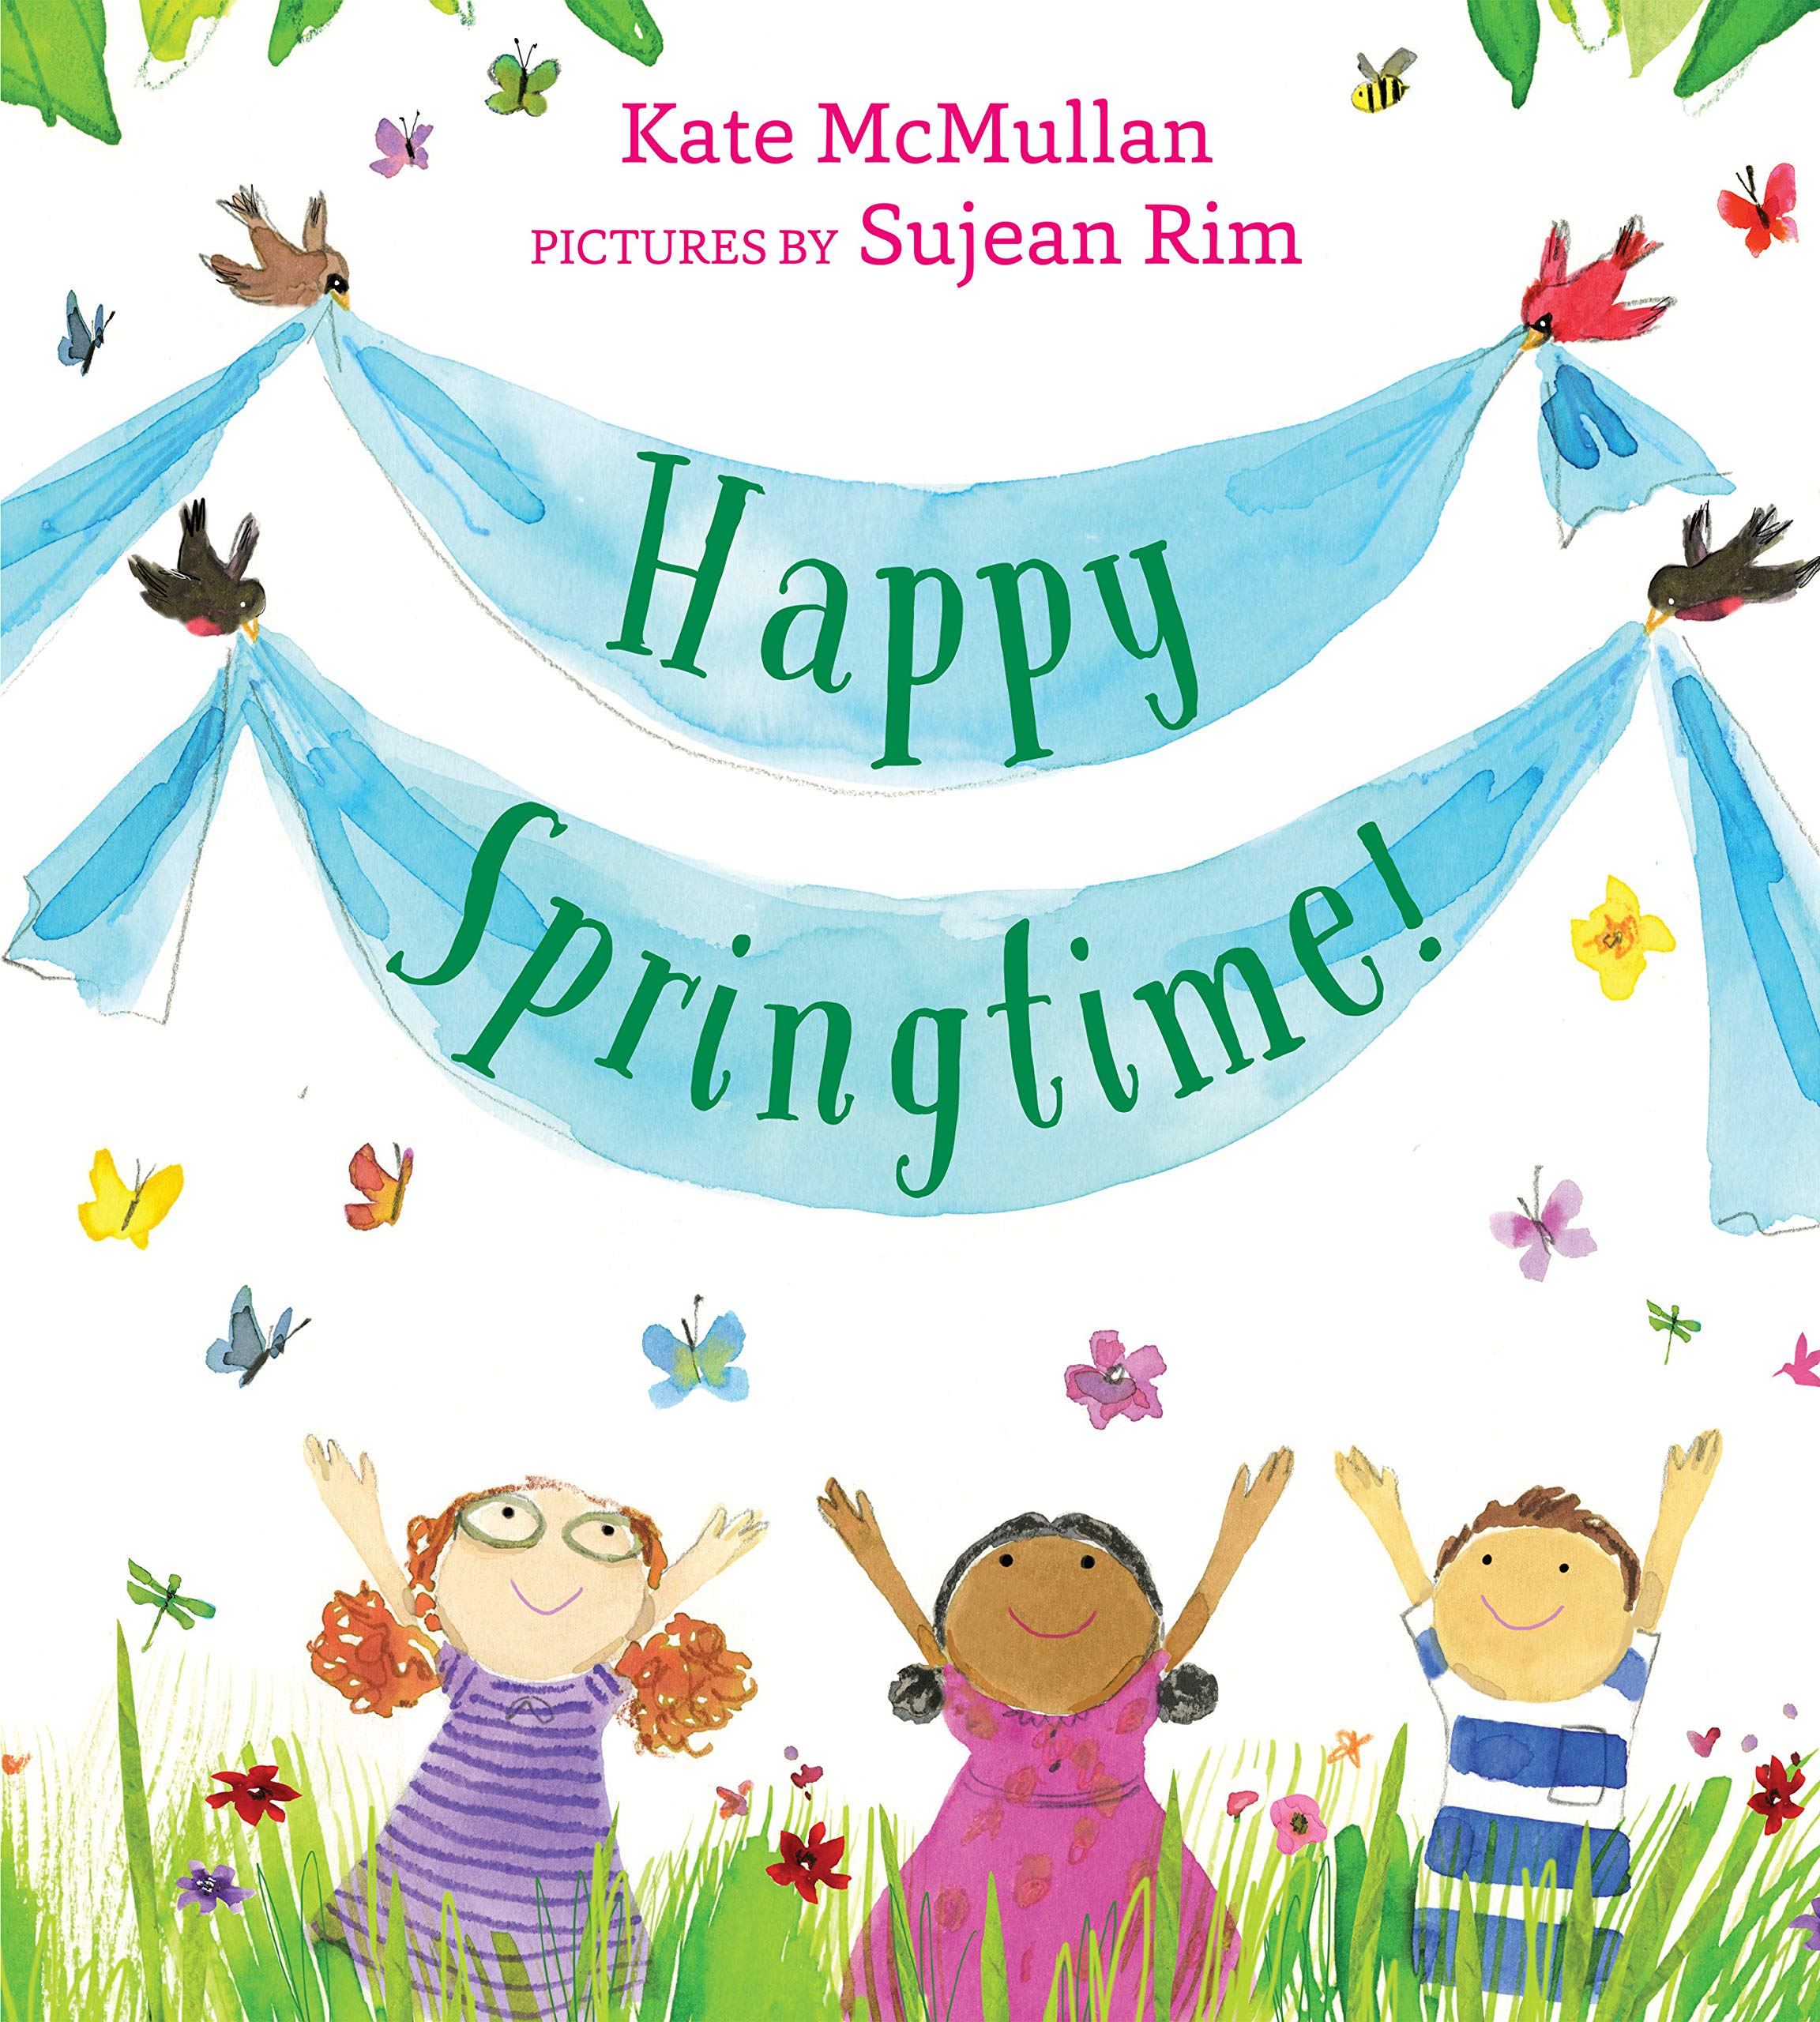 speech and language teaching concepts for Happy Springtime in speech therapy